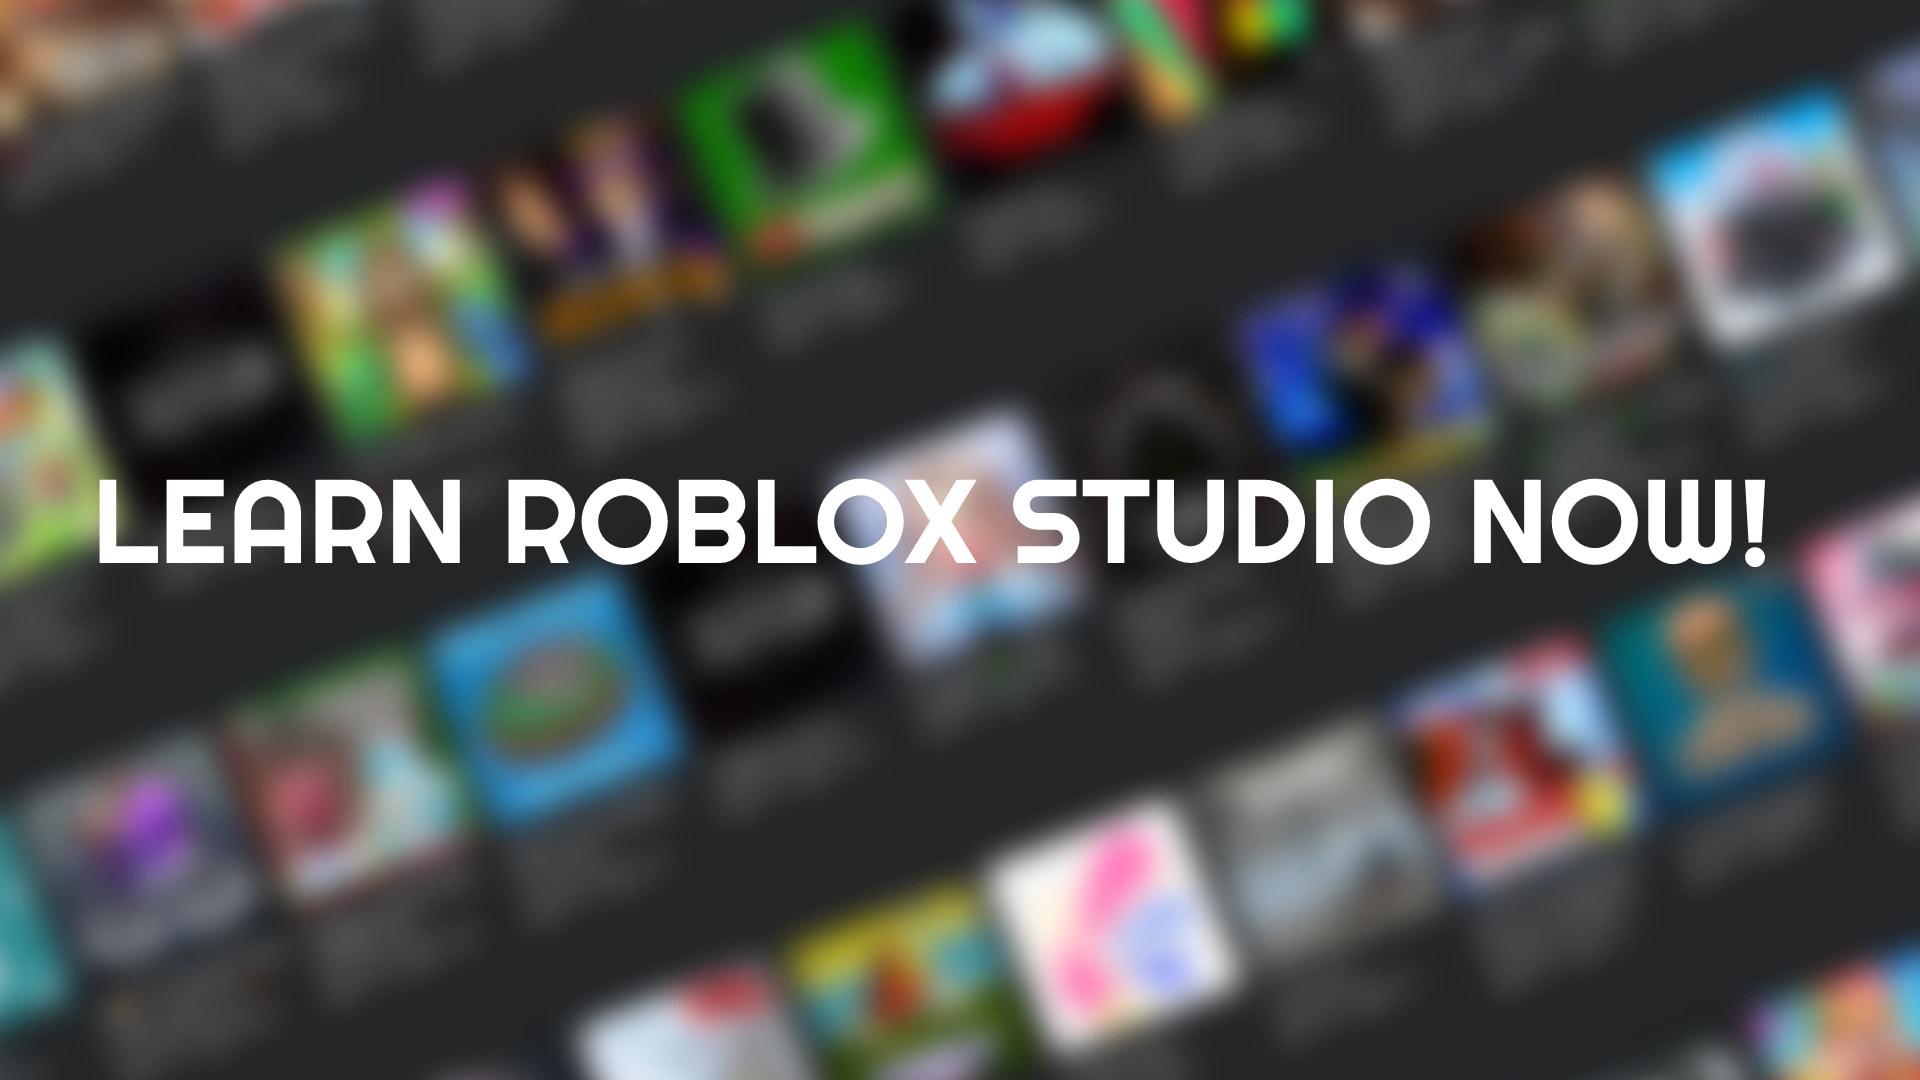 Teach you basic roblox studio and roblox game development by Funic31